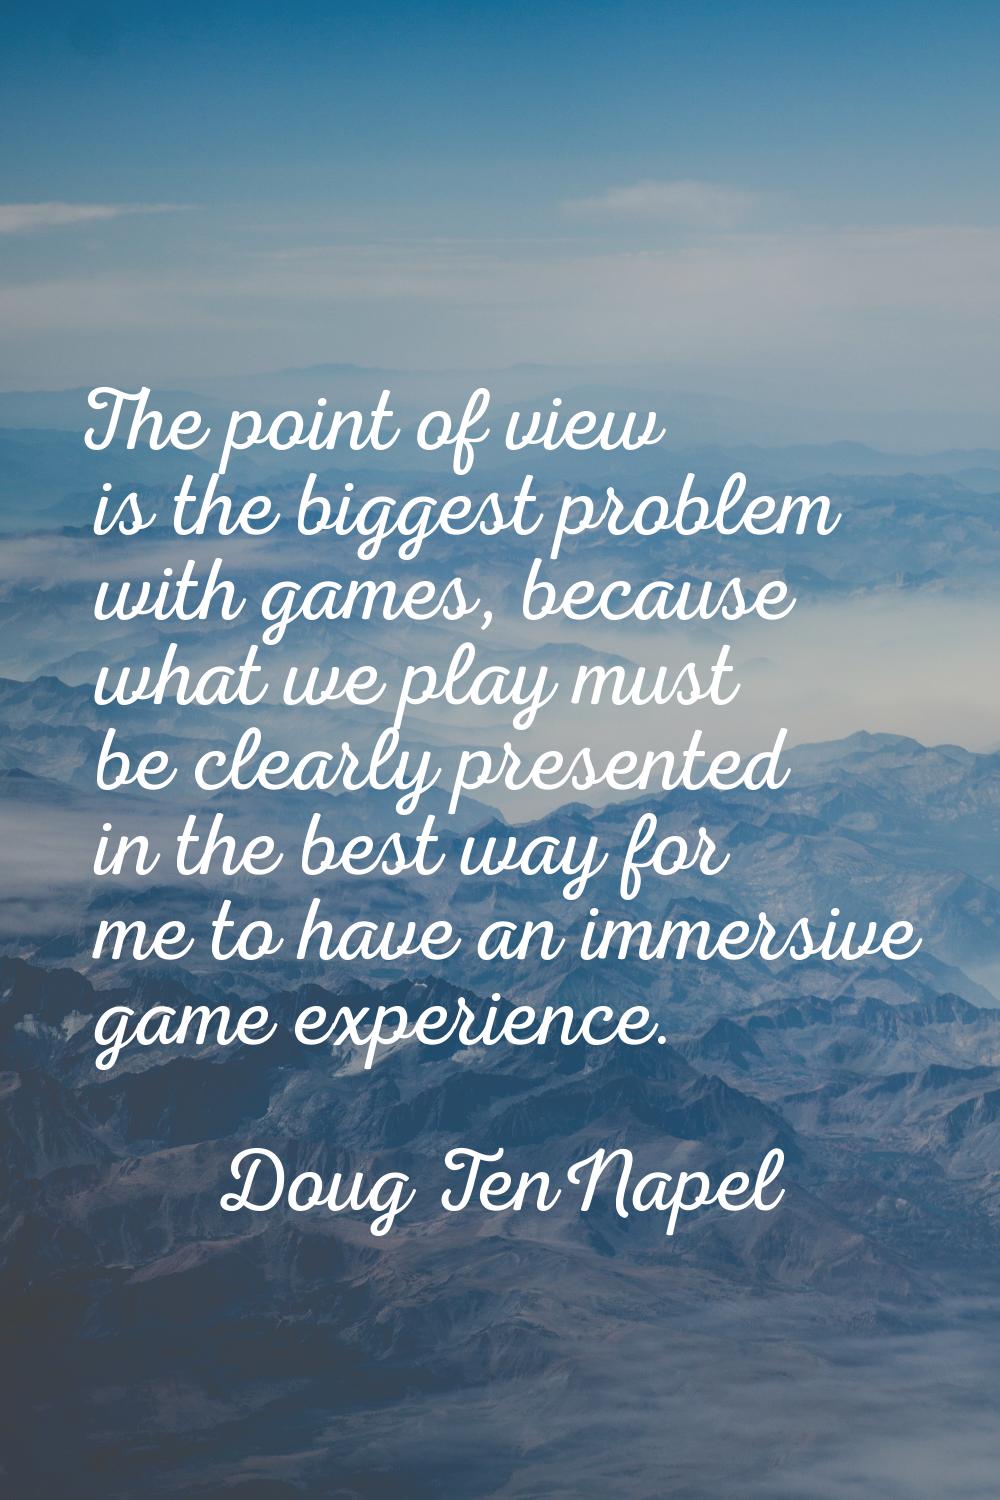 The point of view is the biggest problem with games, because what we play must be clearly presented